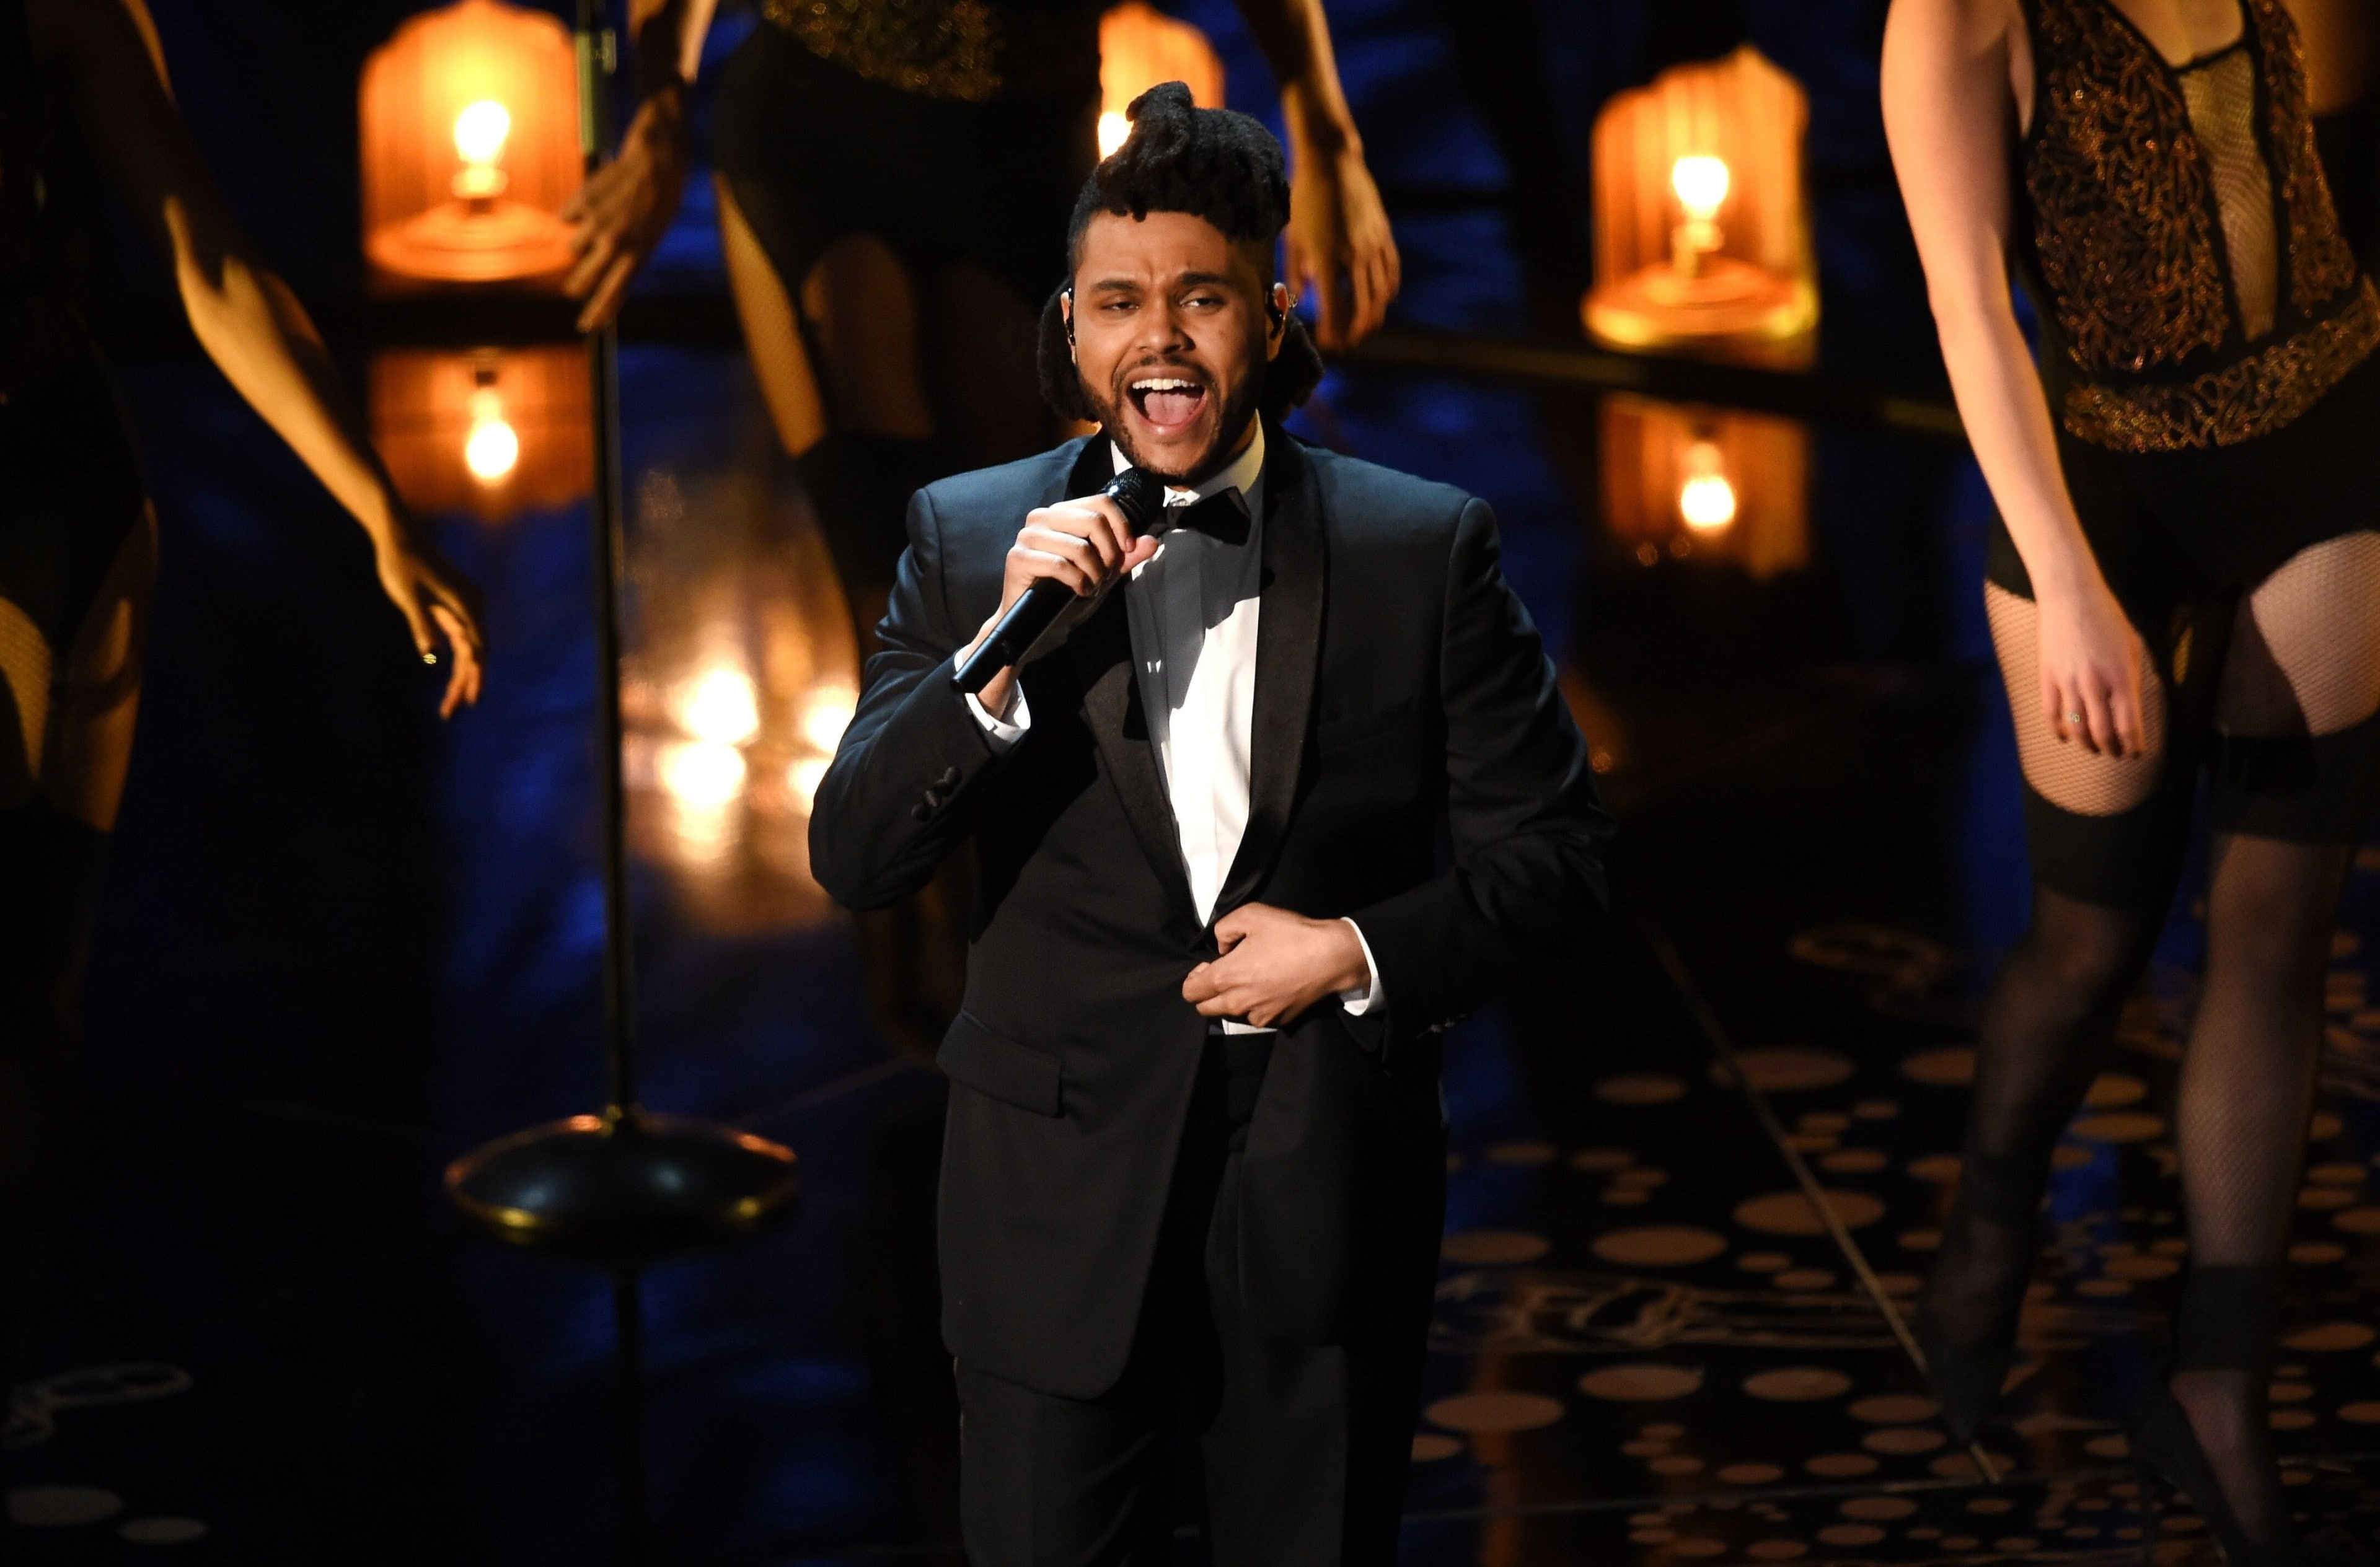 the weeknd 4k hd  pic, night, smiling, men, young adult, well-dressed